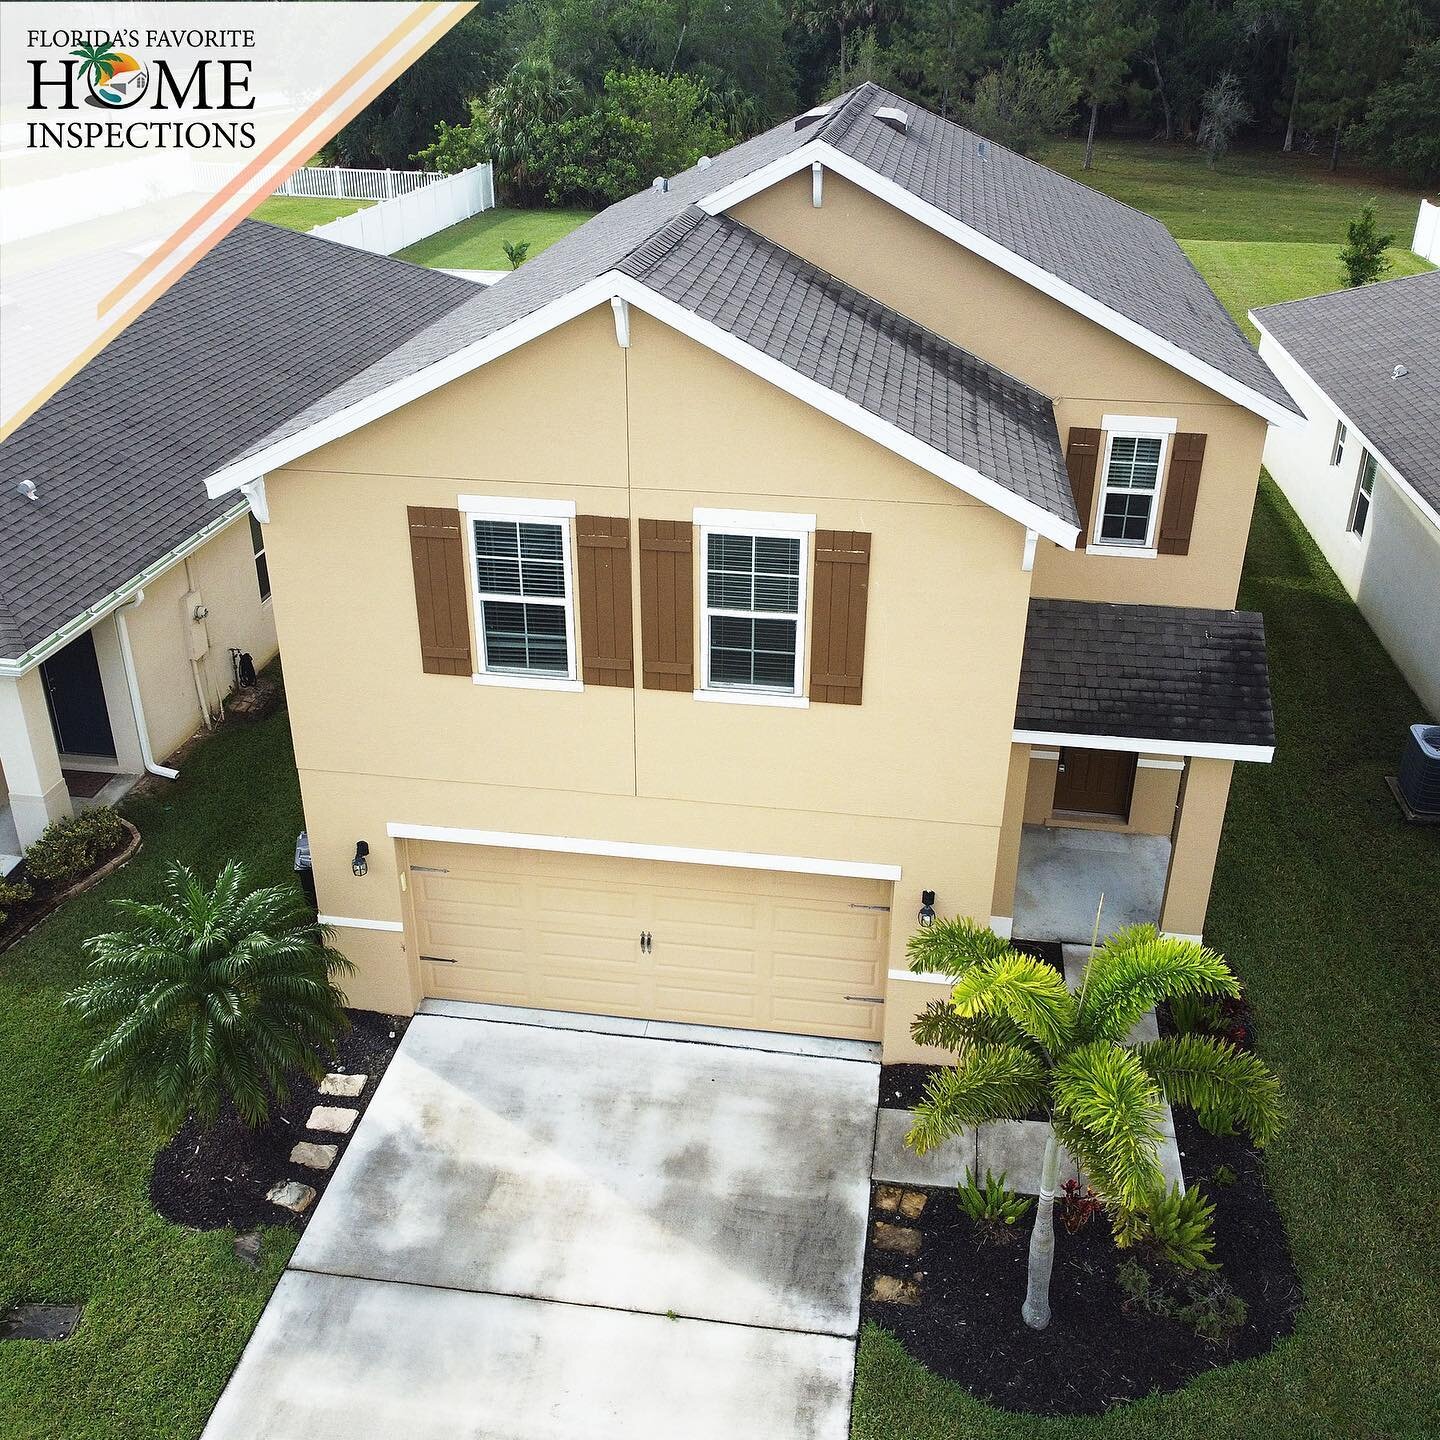 Home inspection in Port St. Lucie, Florida!